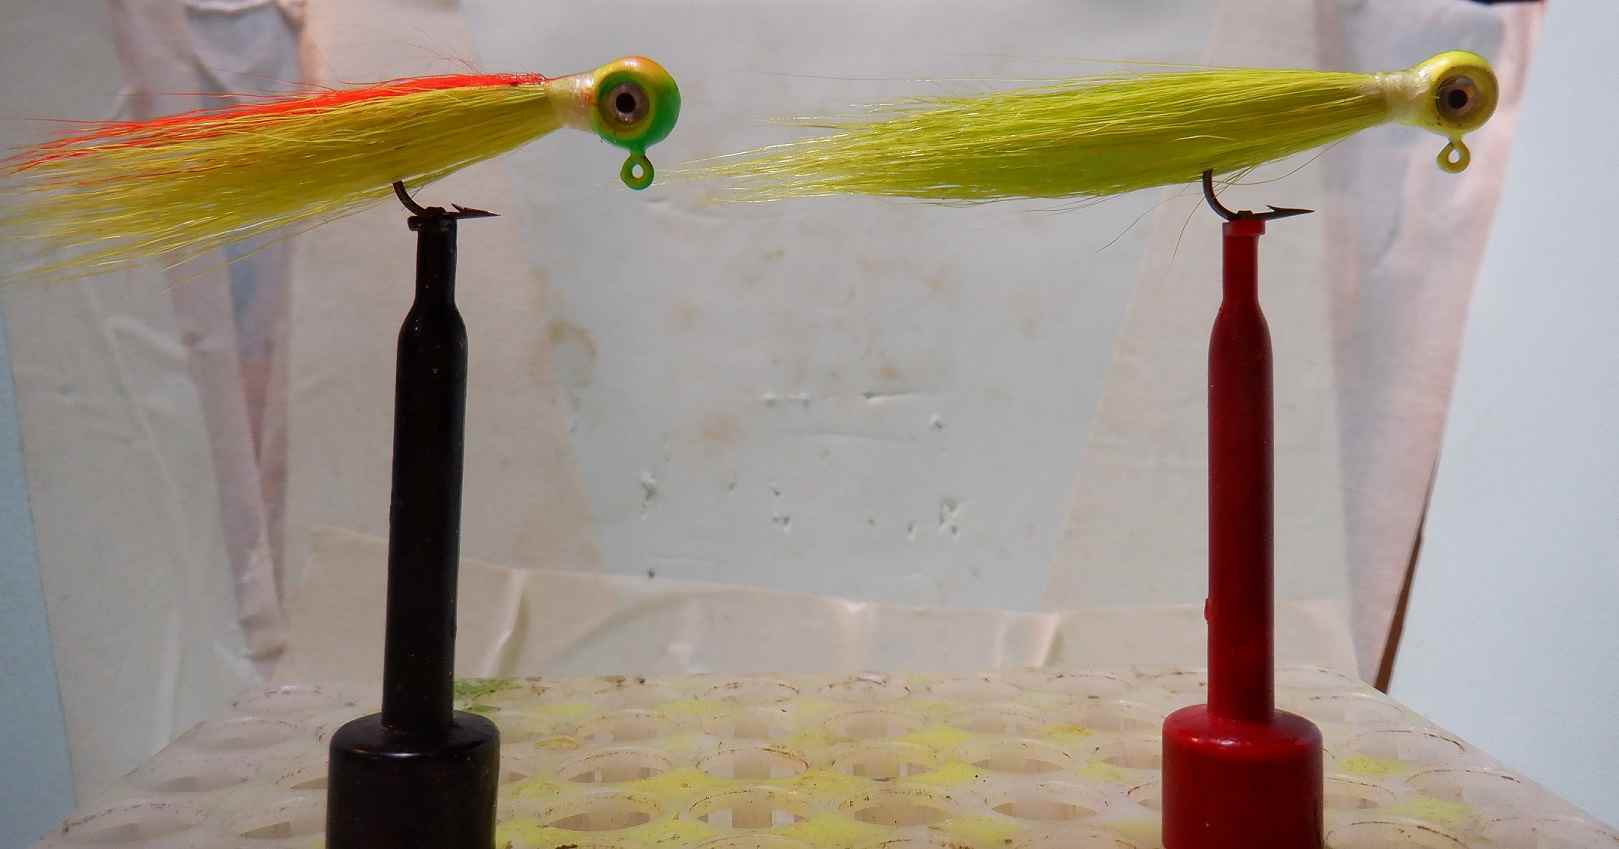 Fly tying.getting back into it. - Page 5 - Tacklemaking - Bass Fishing  Forums